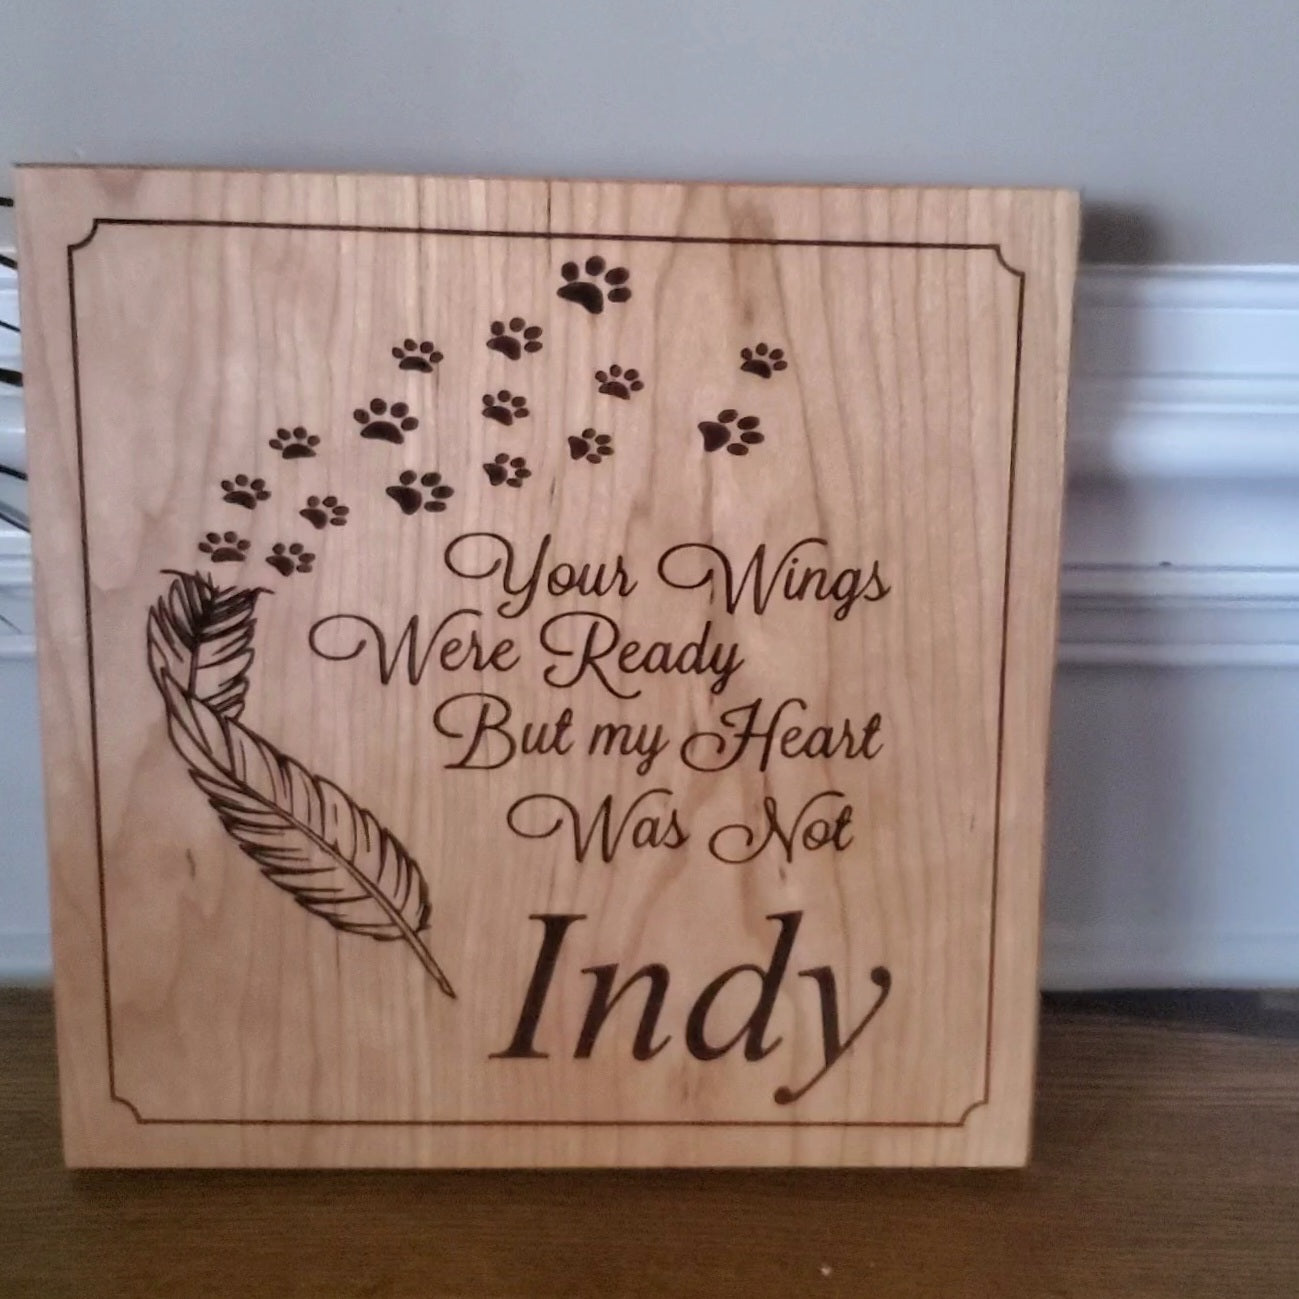 Personalized Your Wings Were Ready but my Heart was Not Wood Plaque with Paw Prints